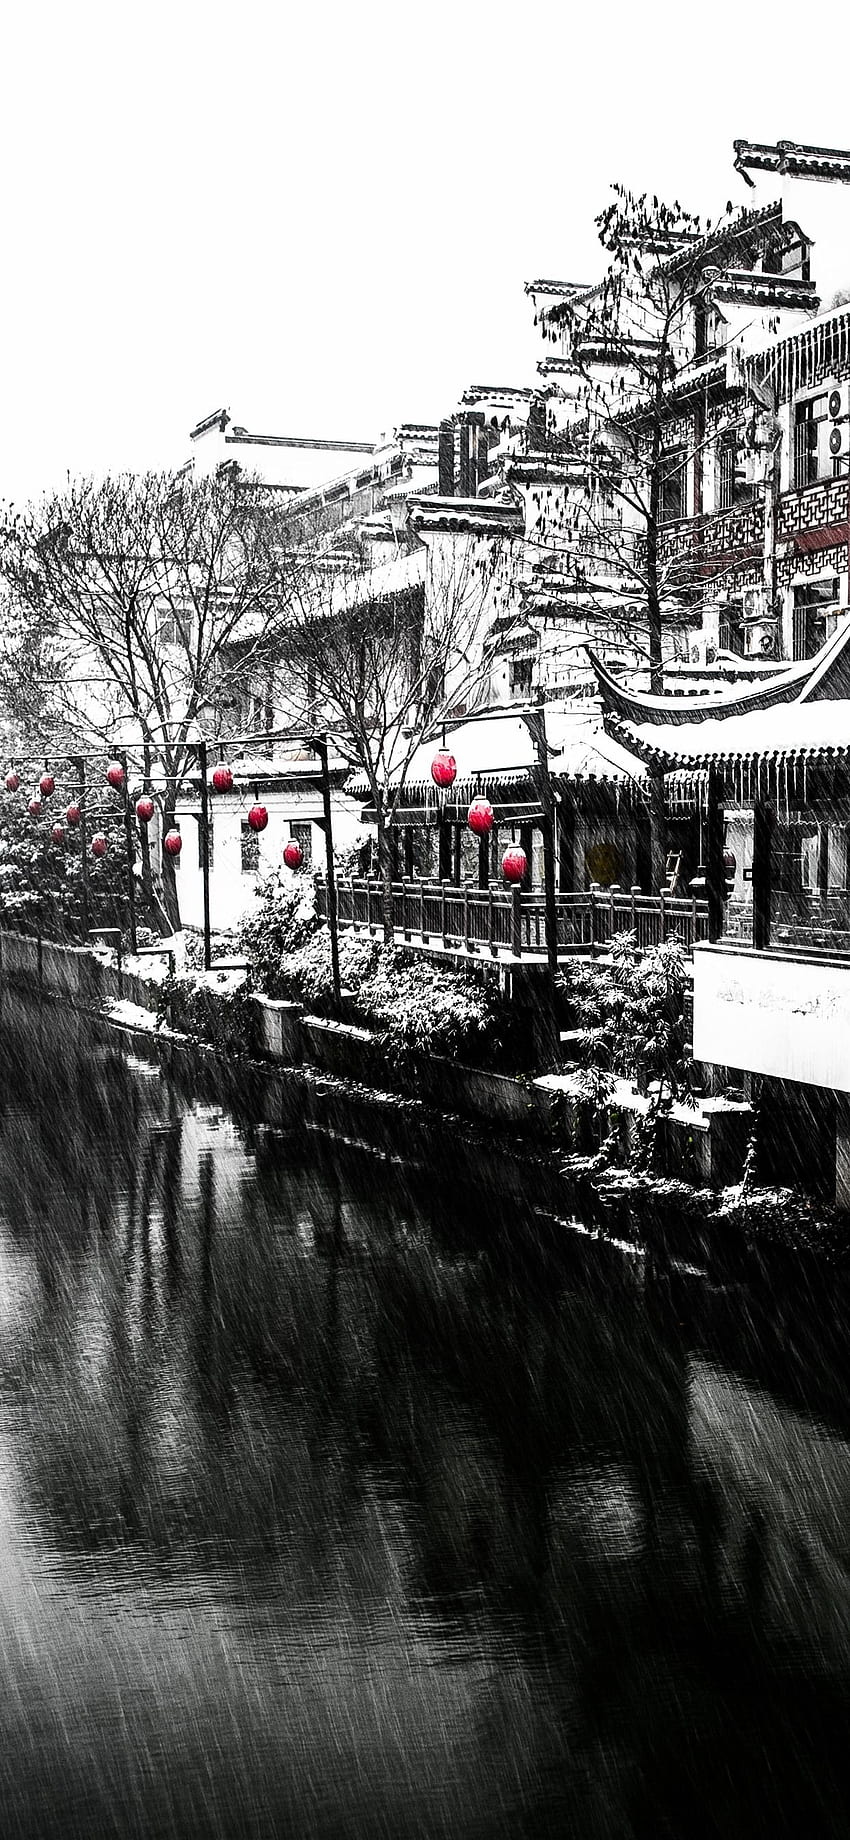 Nanjing, Snowing, Winter, River, House, Retro Style IPhone 11 Pro XS Max , Background HD phone wallpaper